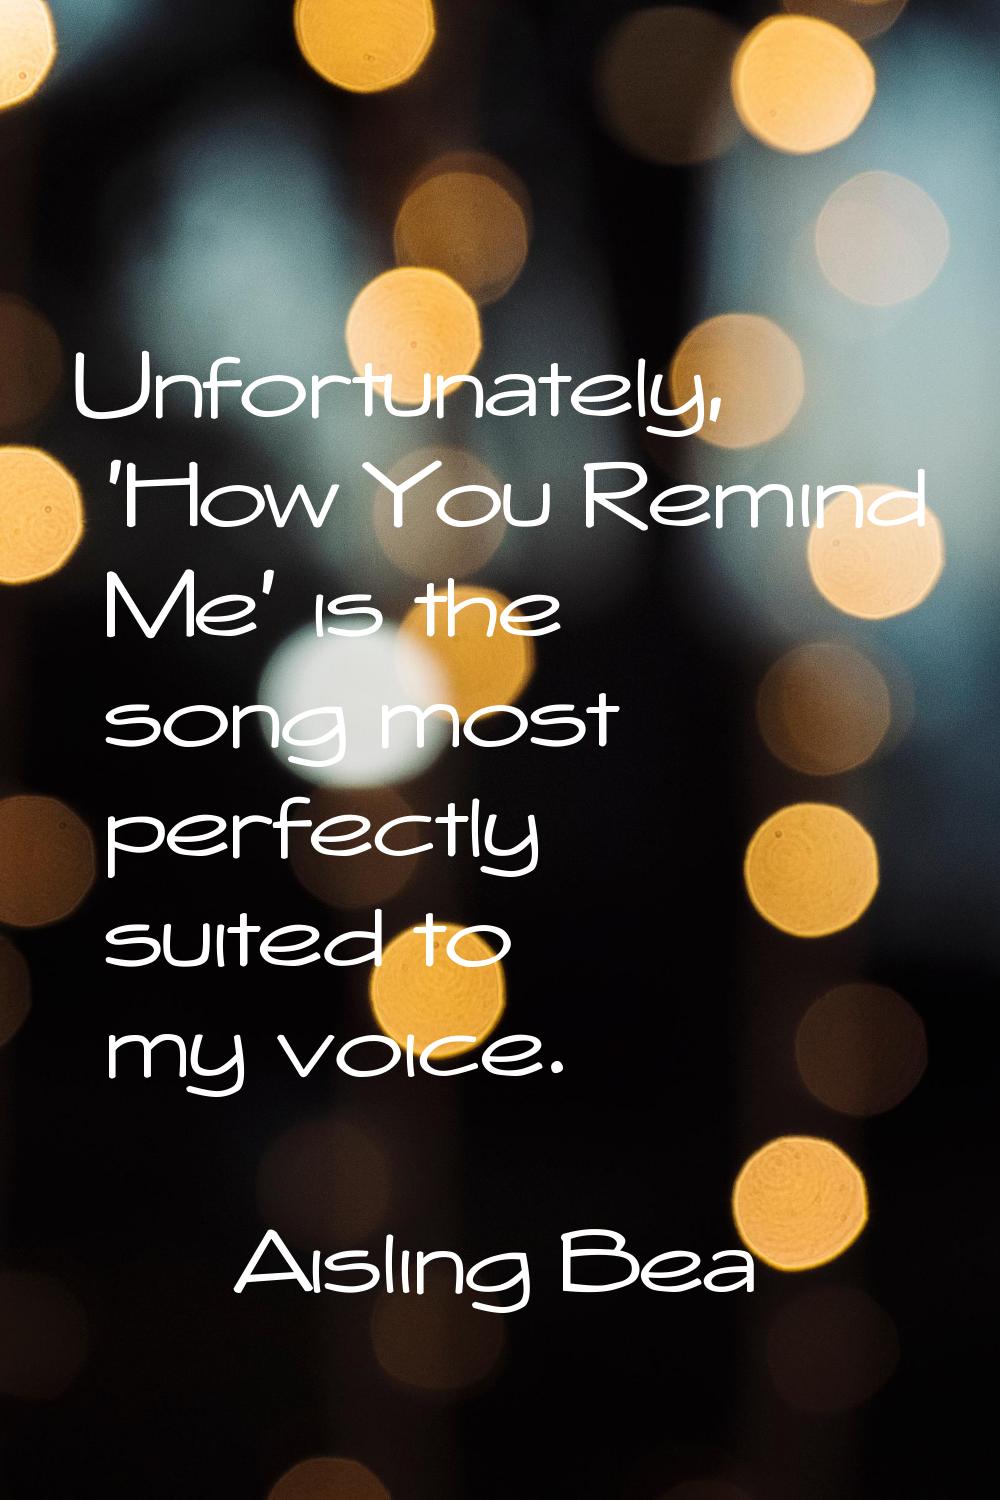 Unfortunately, 'How You Remind Me' is the song most perfectly suited to my voice.